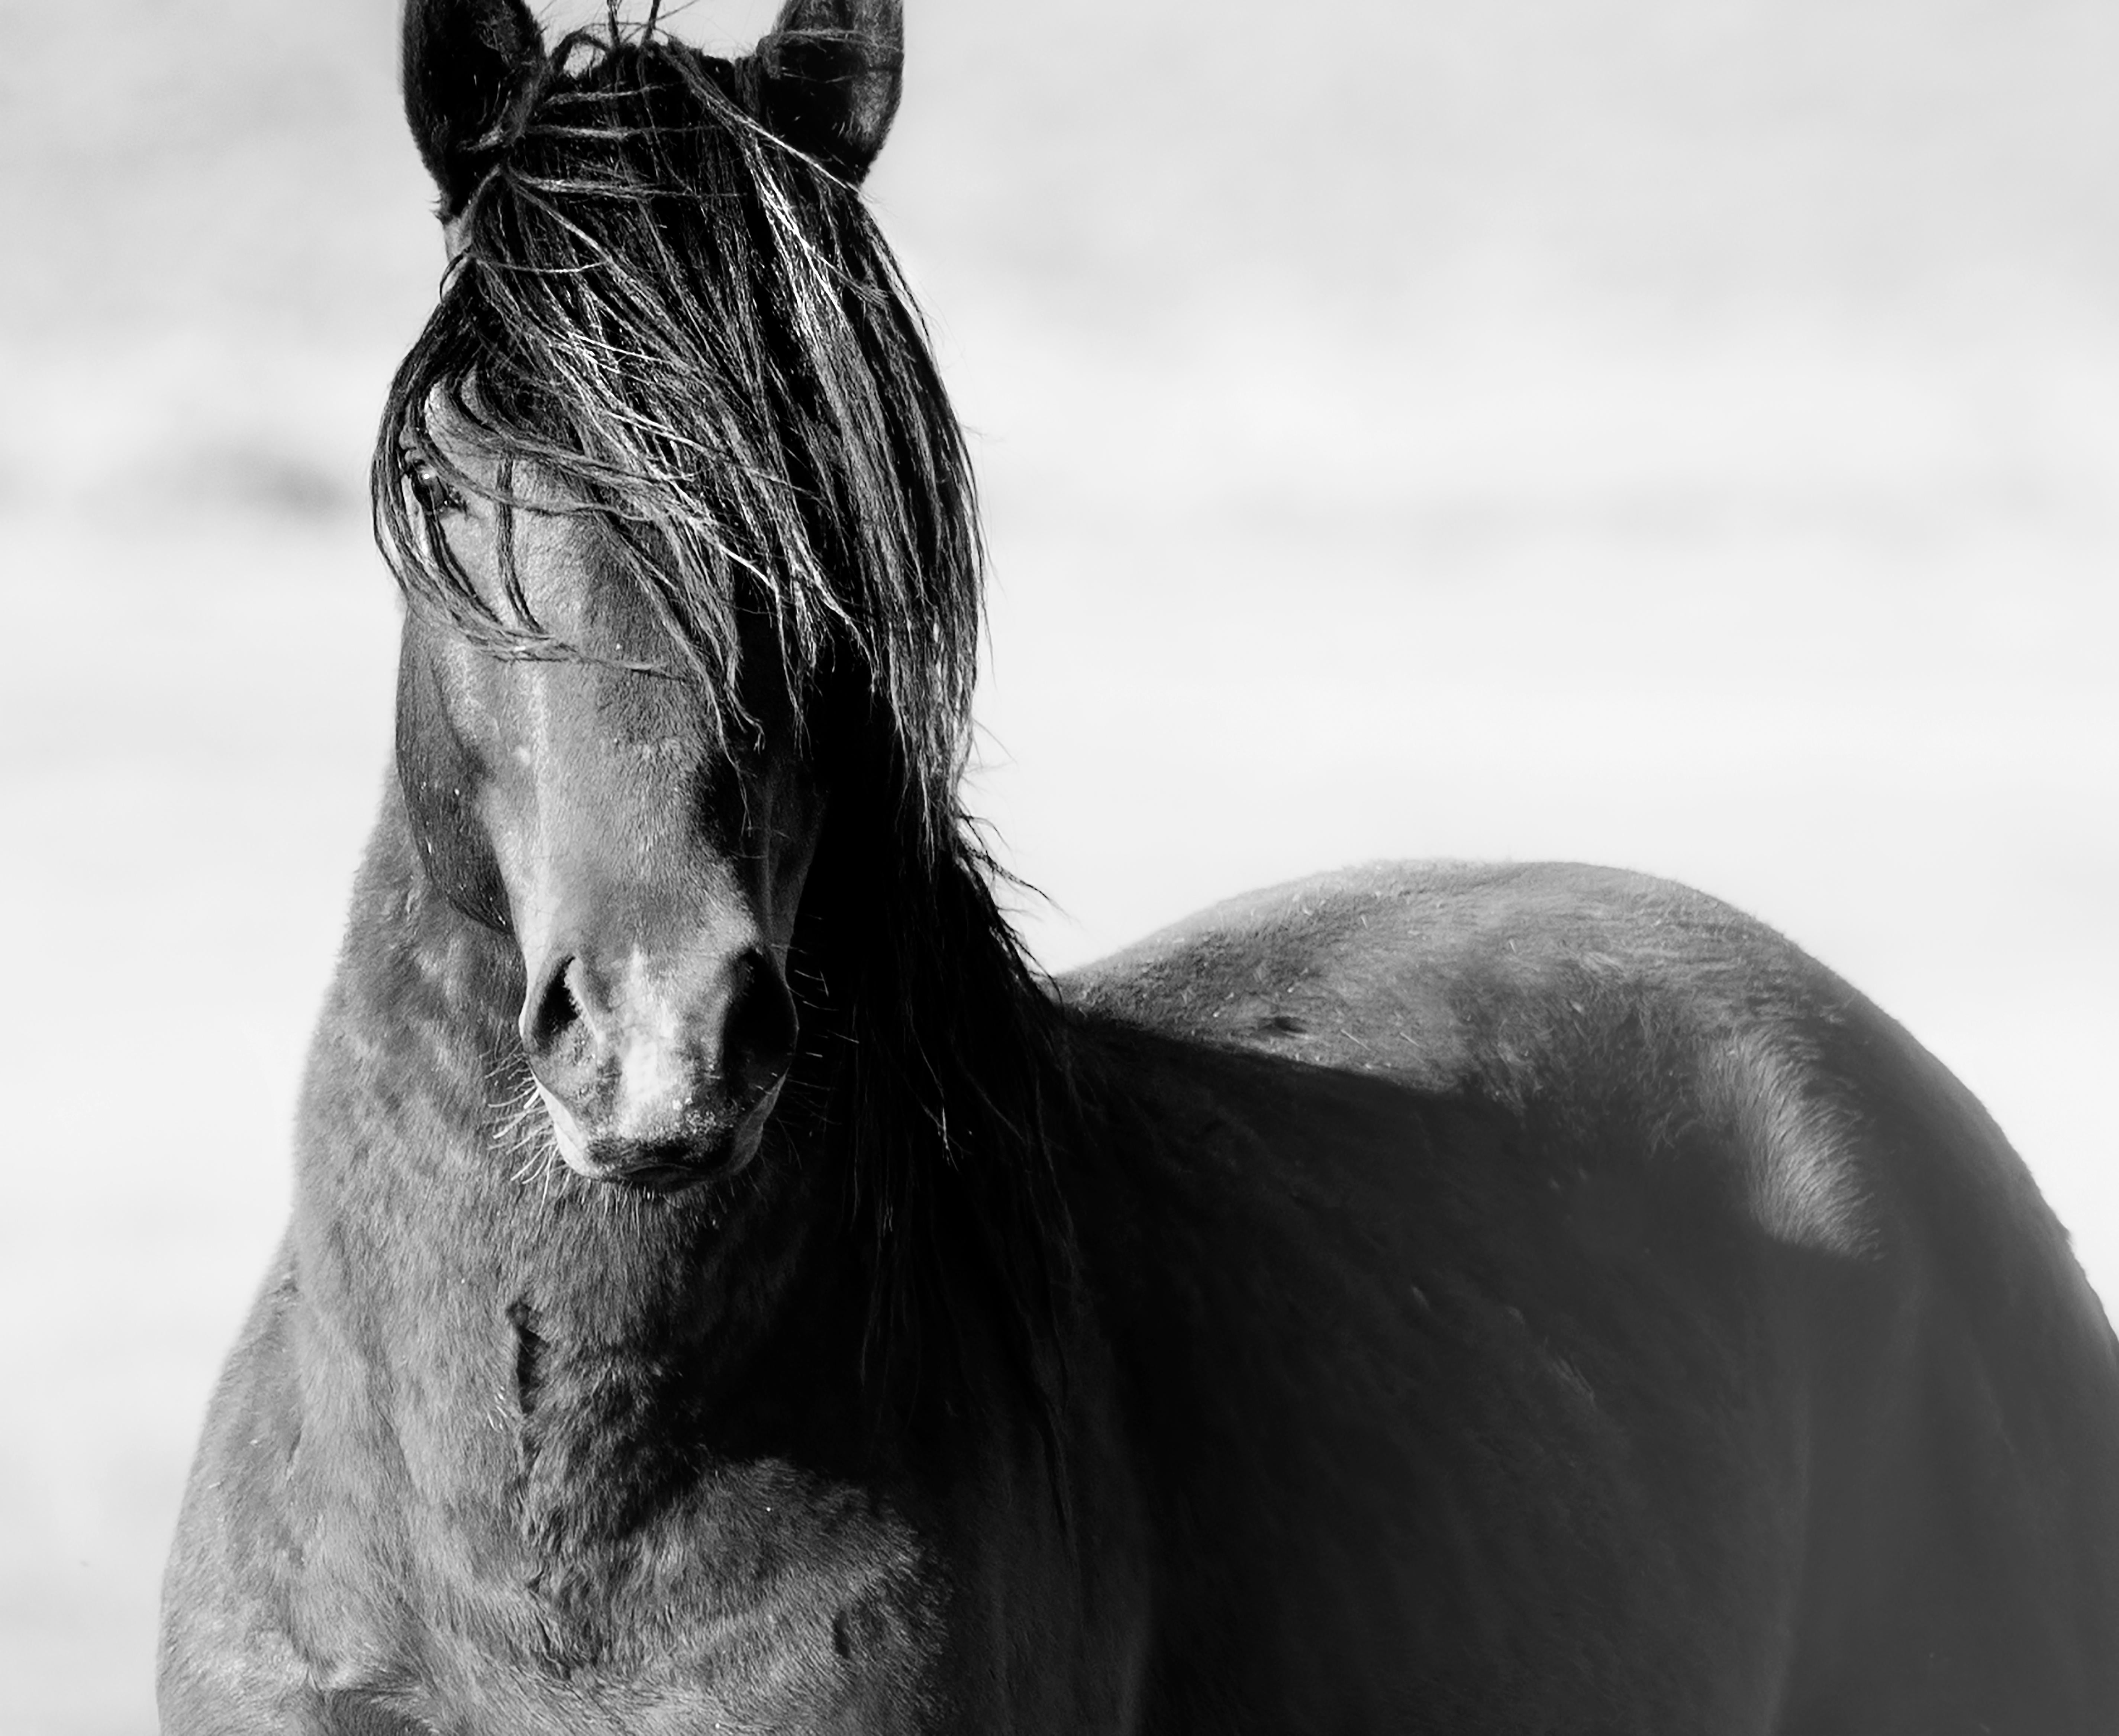 Shane Russeck Animal Print - "Wild" 36x48 Black and White Photography of Wild Horse Mustang Unsigned Fine Art